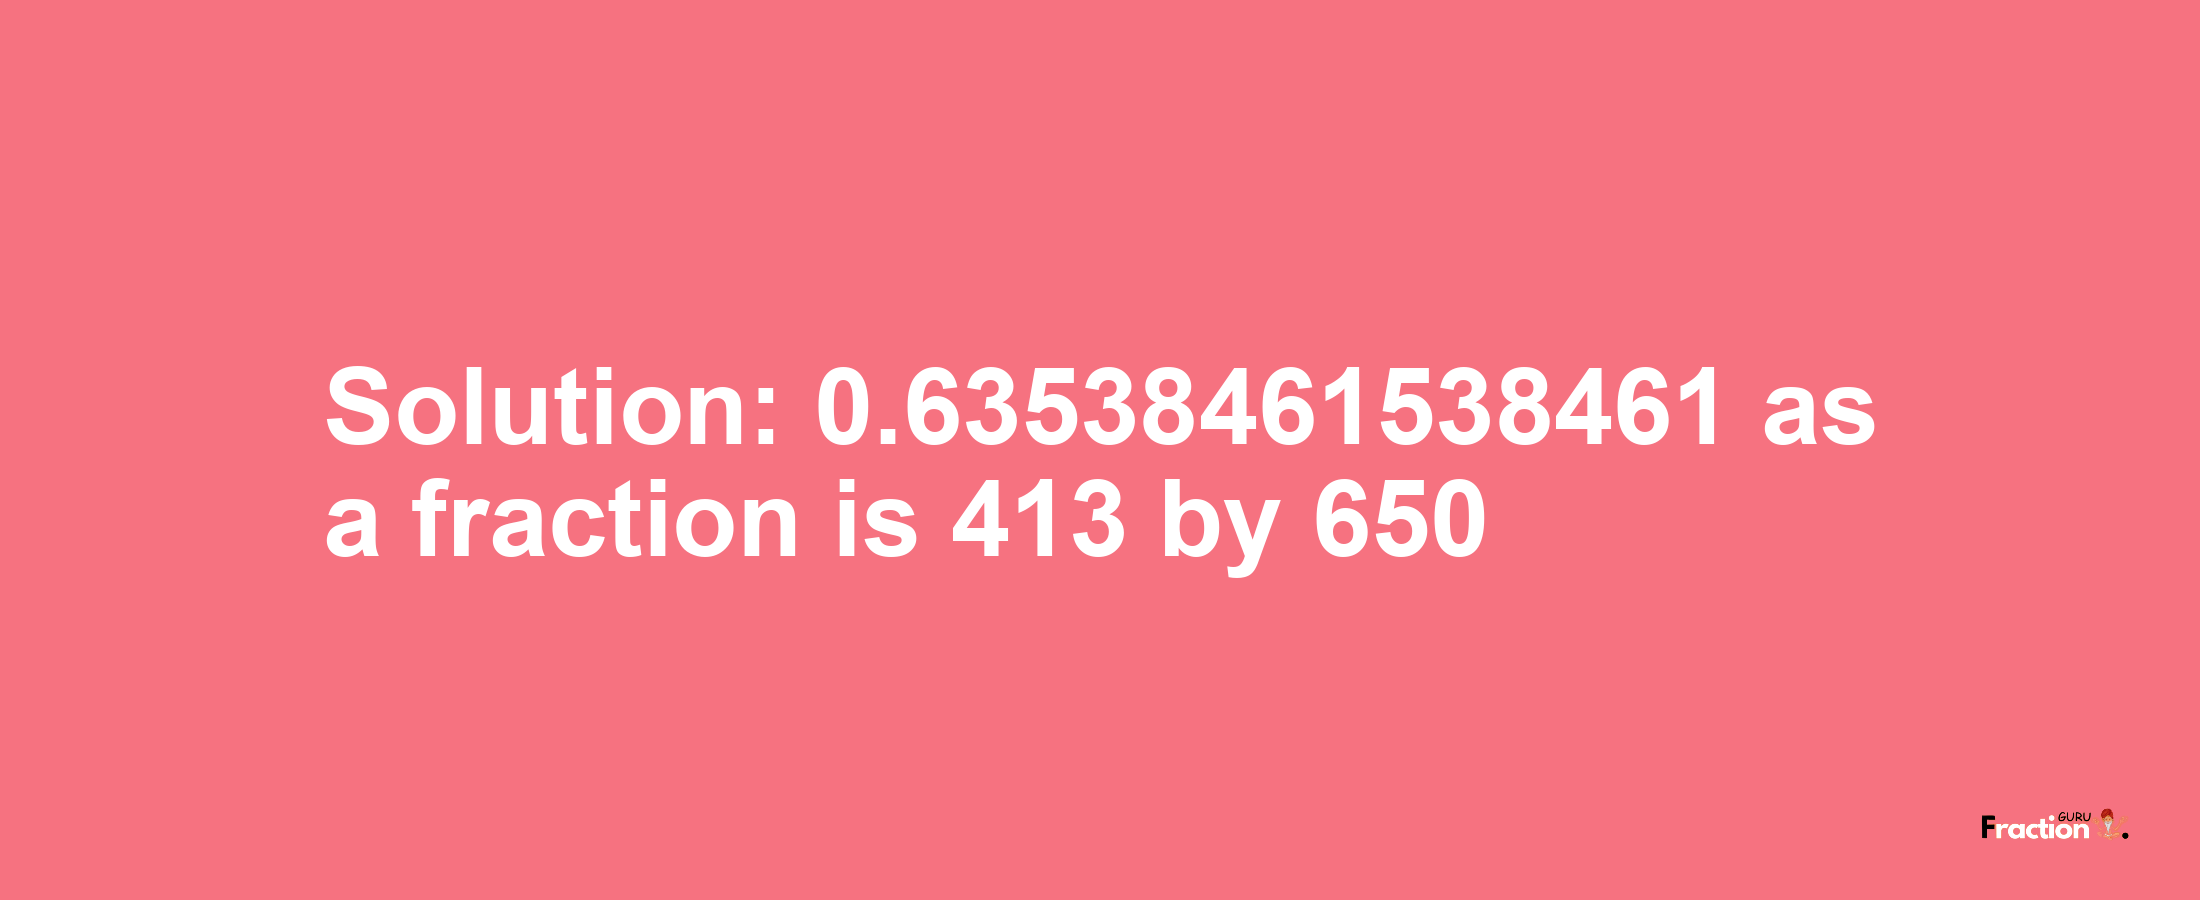 Solution:0.63538461538461 as a fraction is 413/650